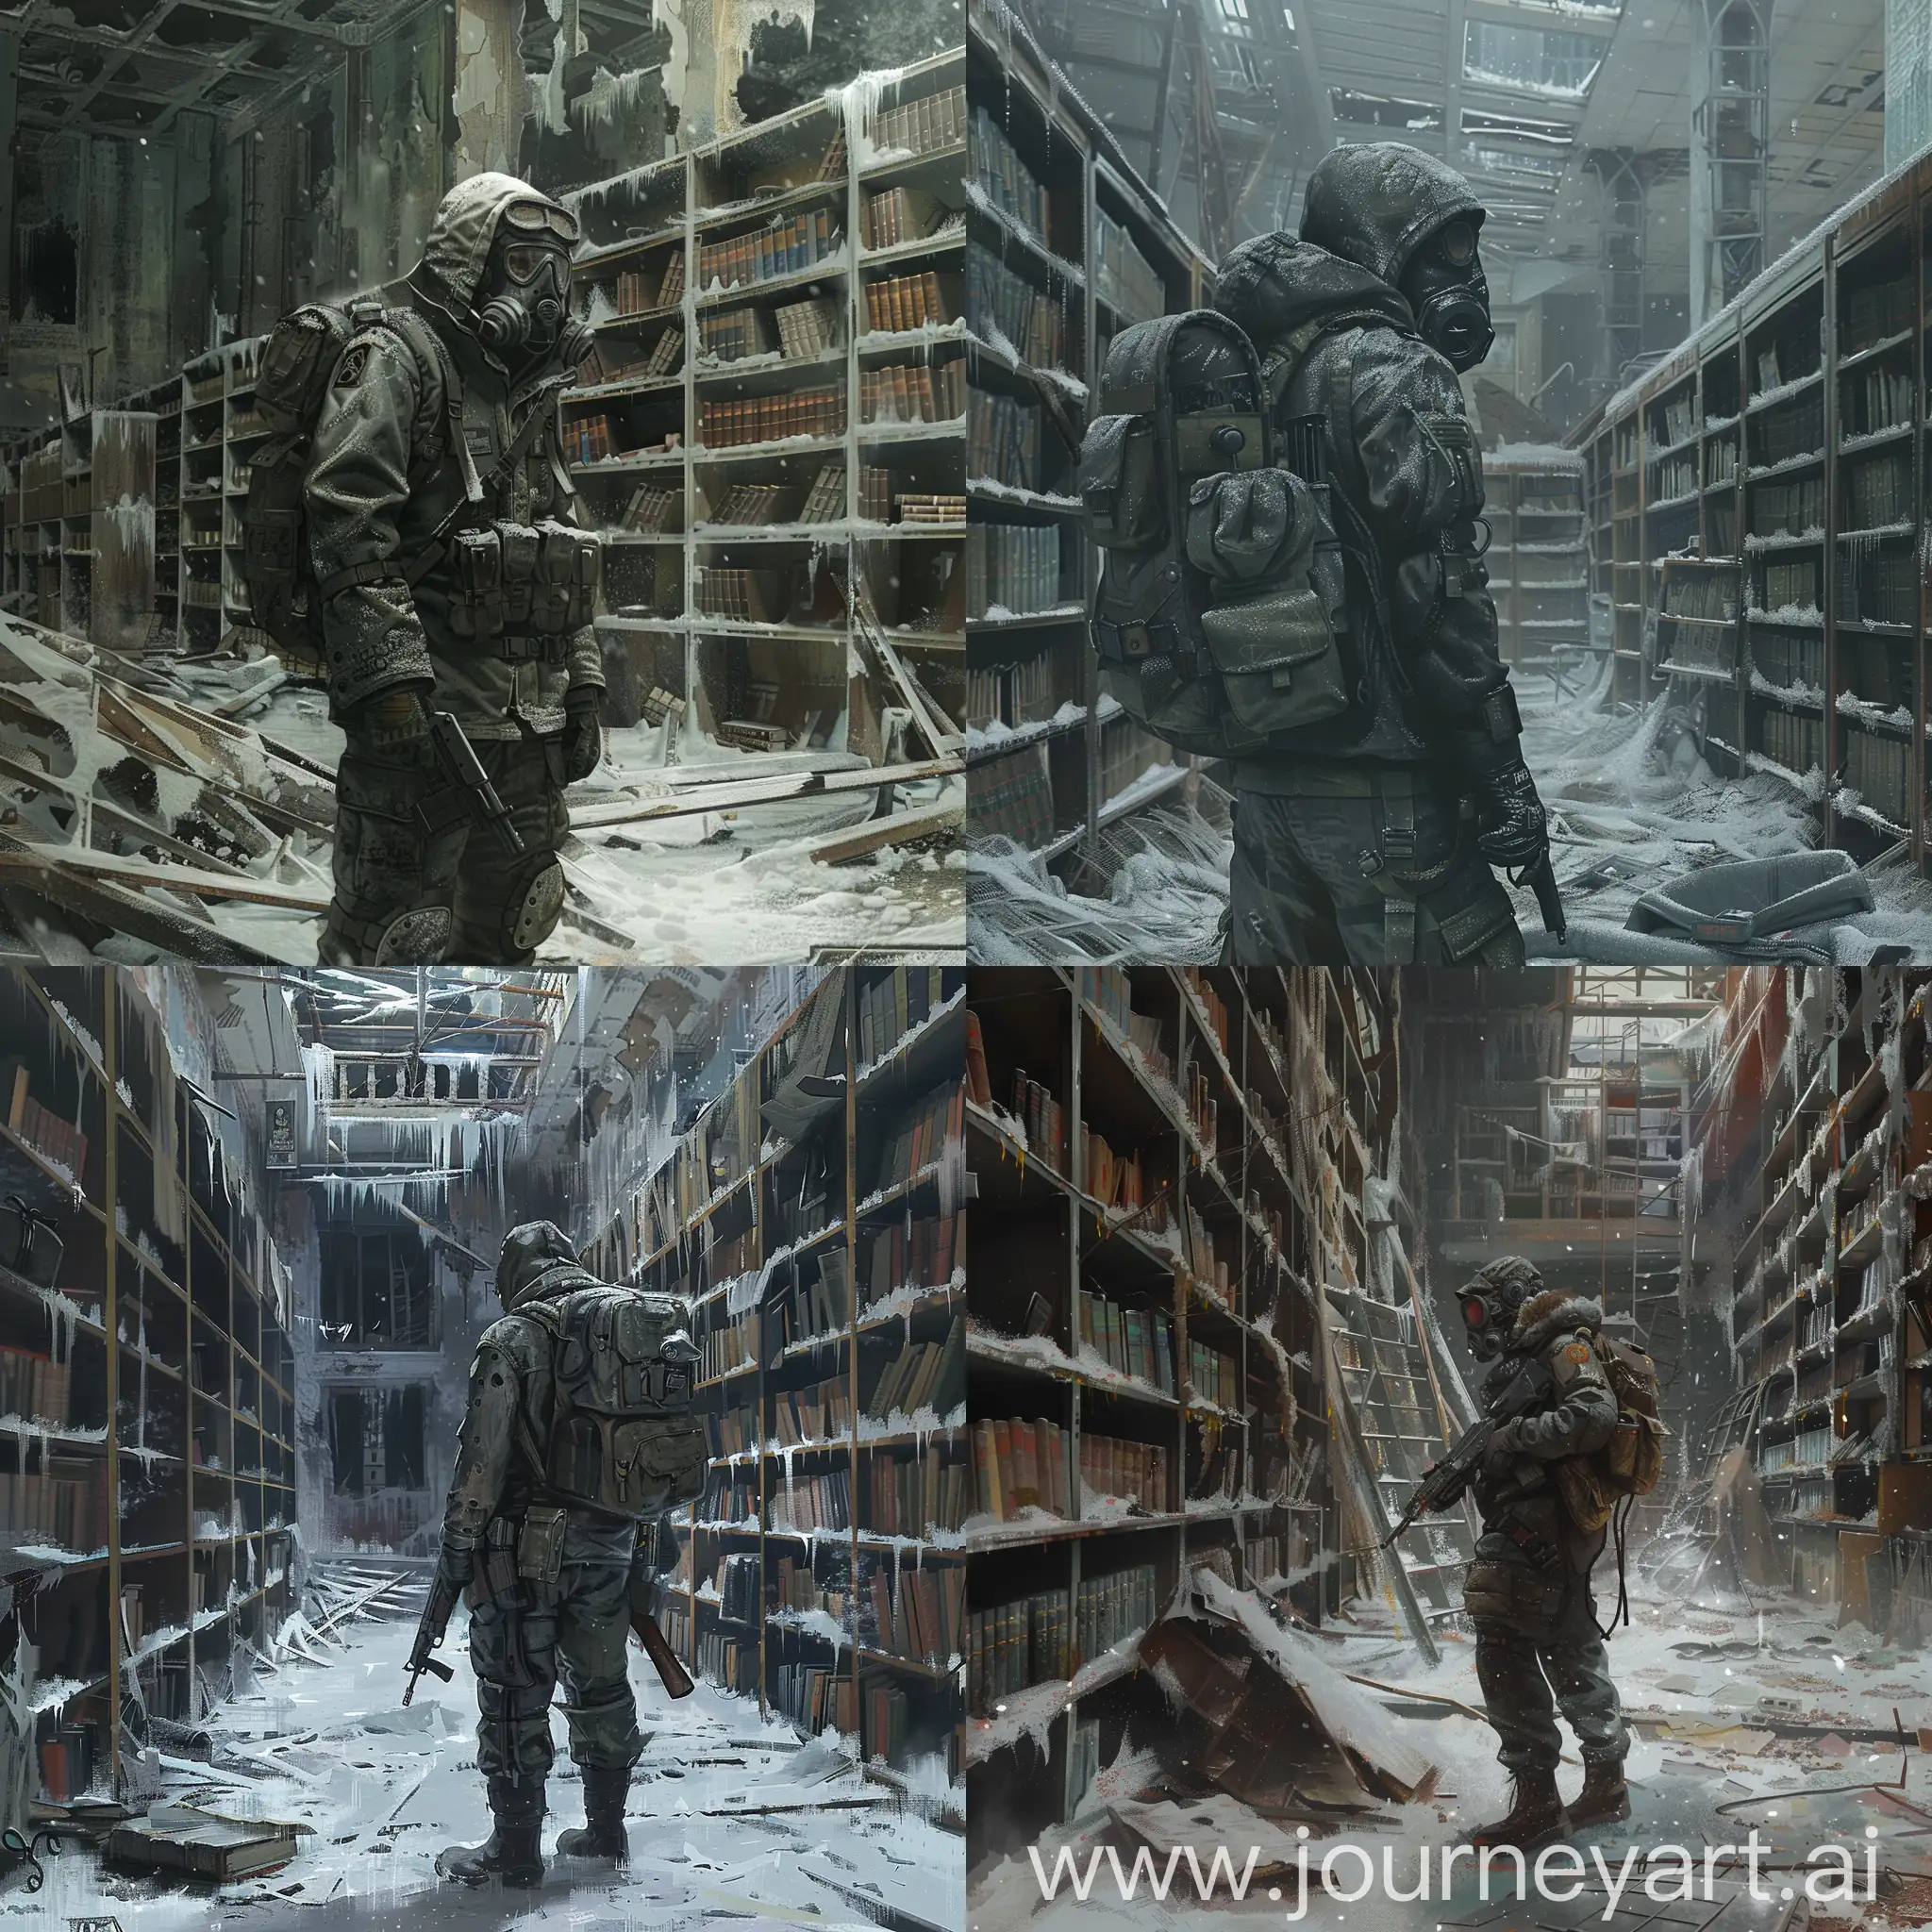 Make art of a survivor in the world of the post-apocalypse Metro 2033, a stalker stands inside a large destroyed Lenin library in a destroyed and radioactive winter Moscow, almost all shelves are destroyed or rotted, the stalker himself is wearing a radiation respirator, in a gray worker, slightly torn overalls, unloading with pouches on top of the overalls, belt, winter gloves, Soviet duffel bag on his back, he holds a pistol in his hand, a stalker in a fighting, tense pose.